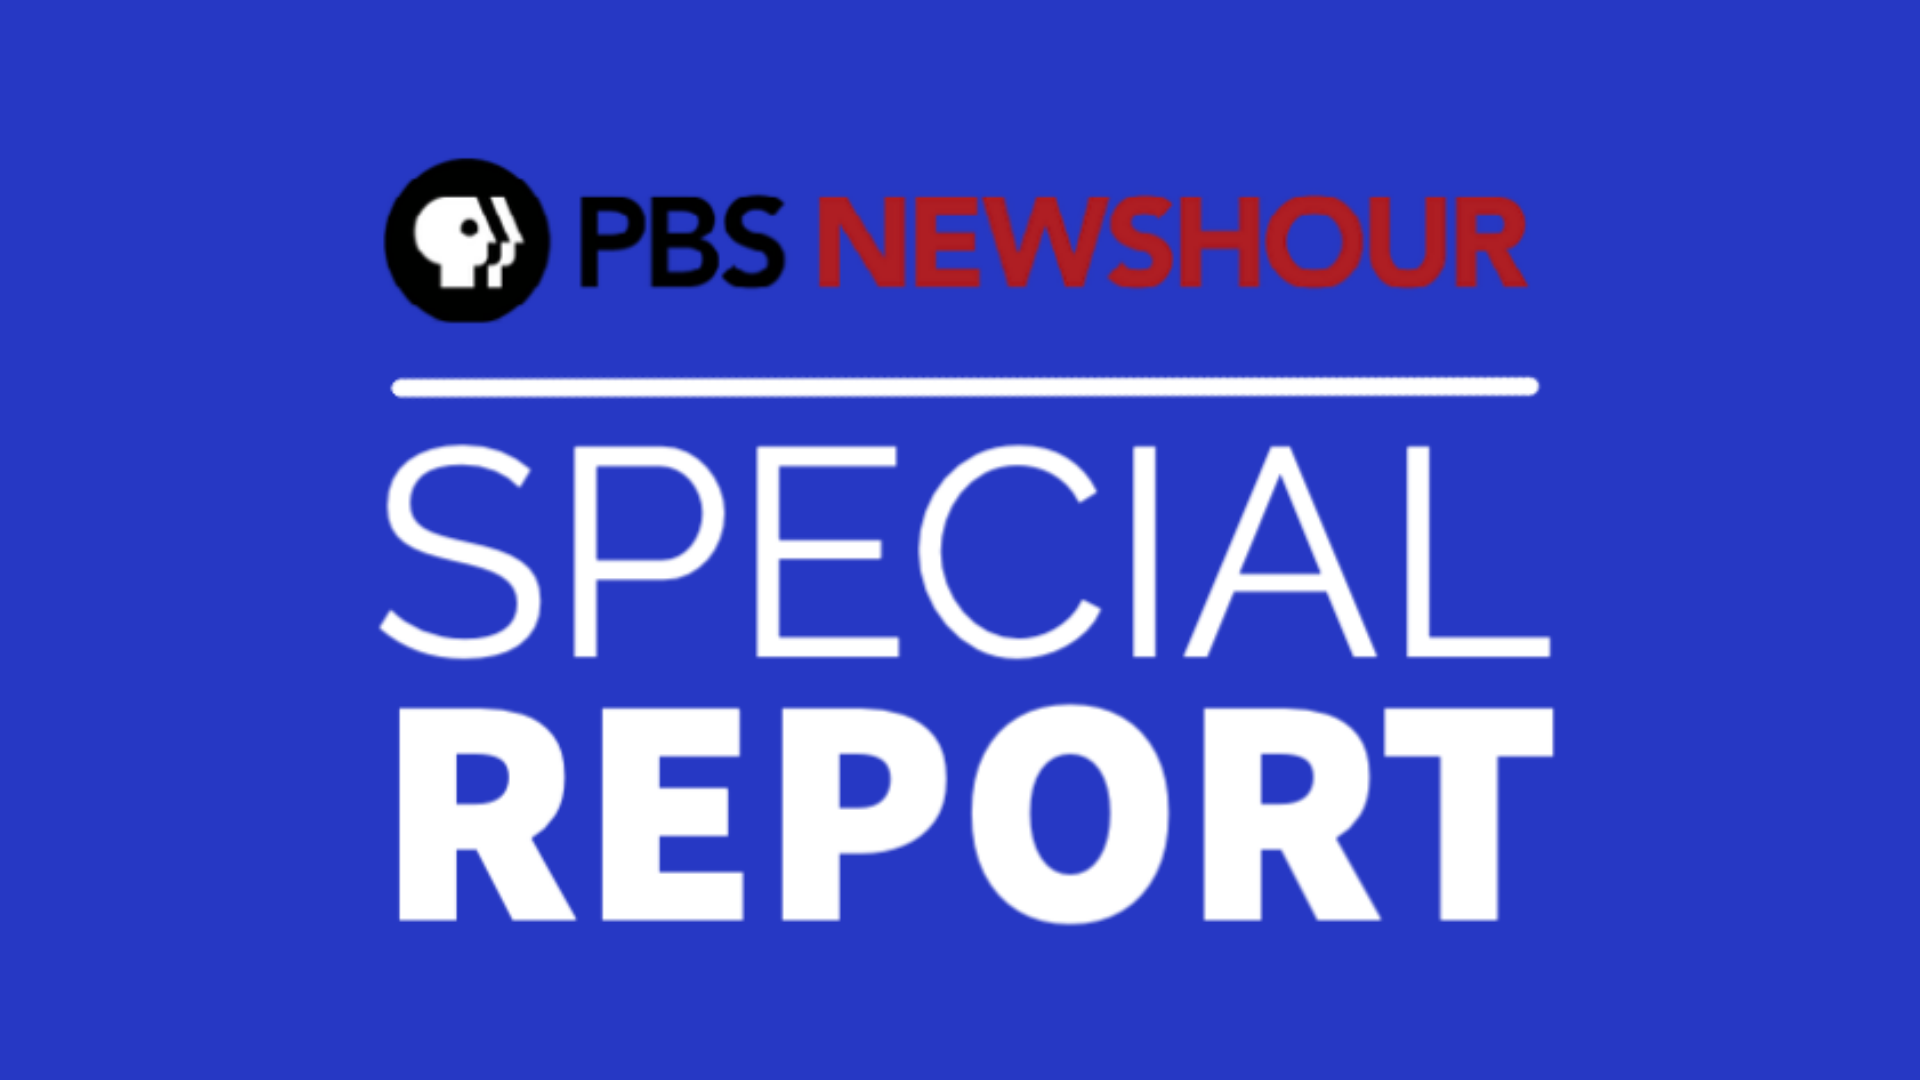 PBS NEWSHOUR SPECIAL REPORT